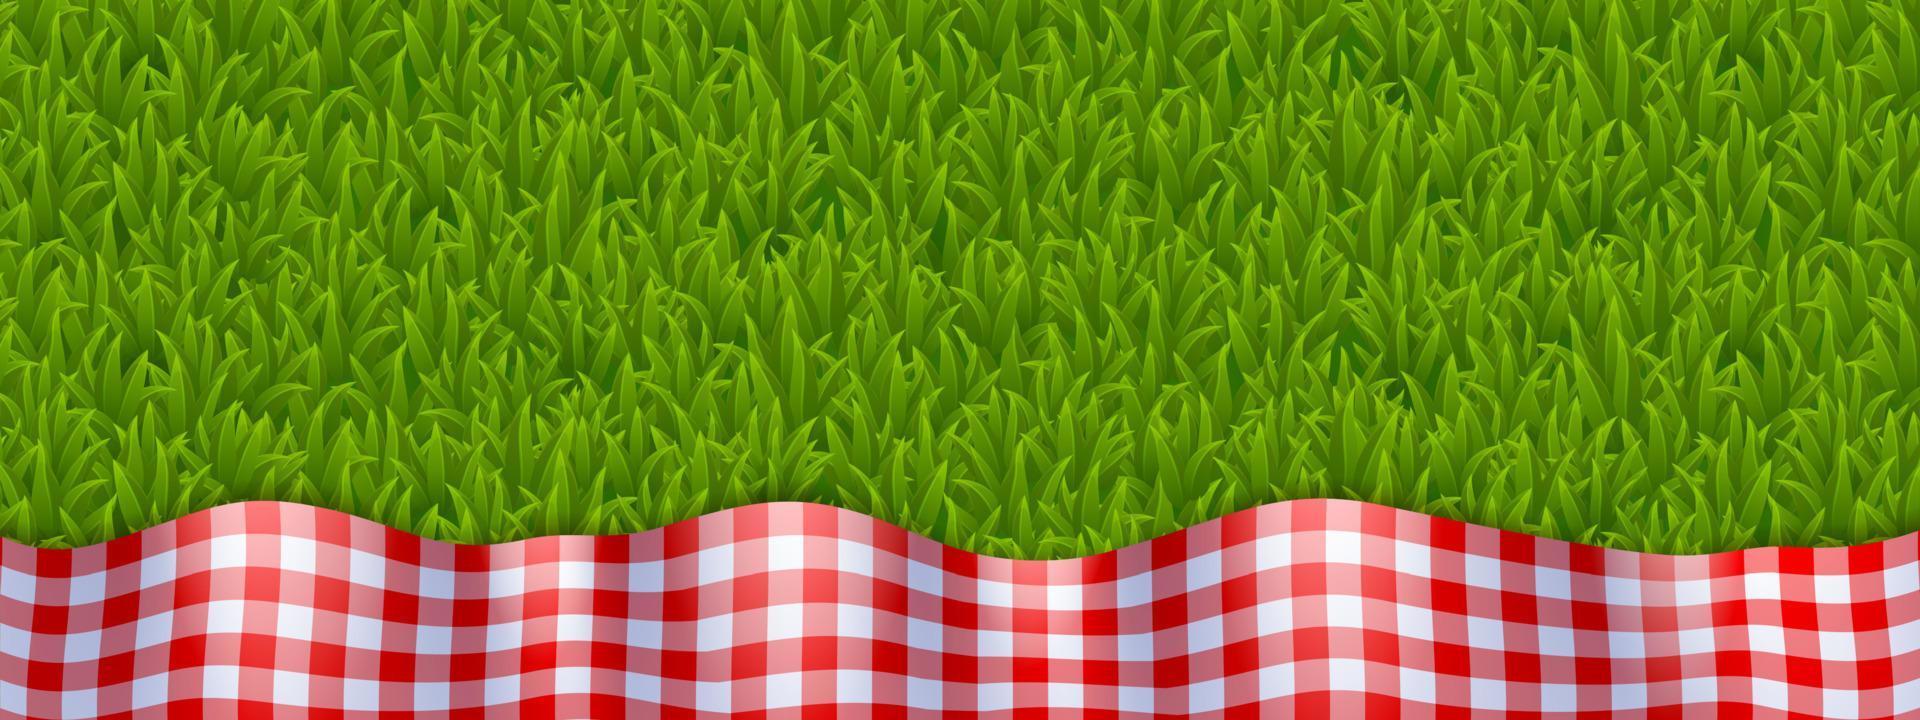 Banner with gingham tablecloth top view design vector